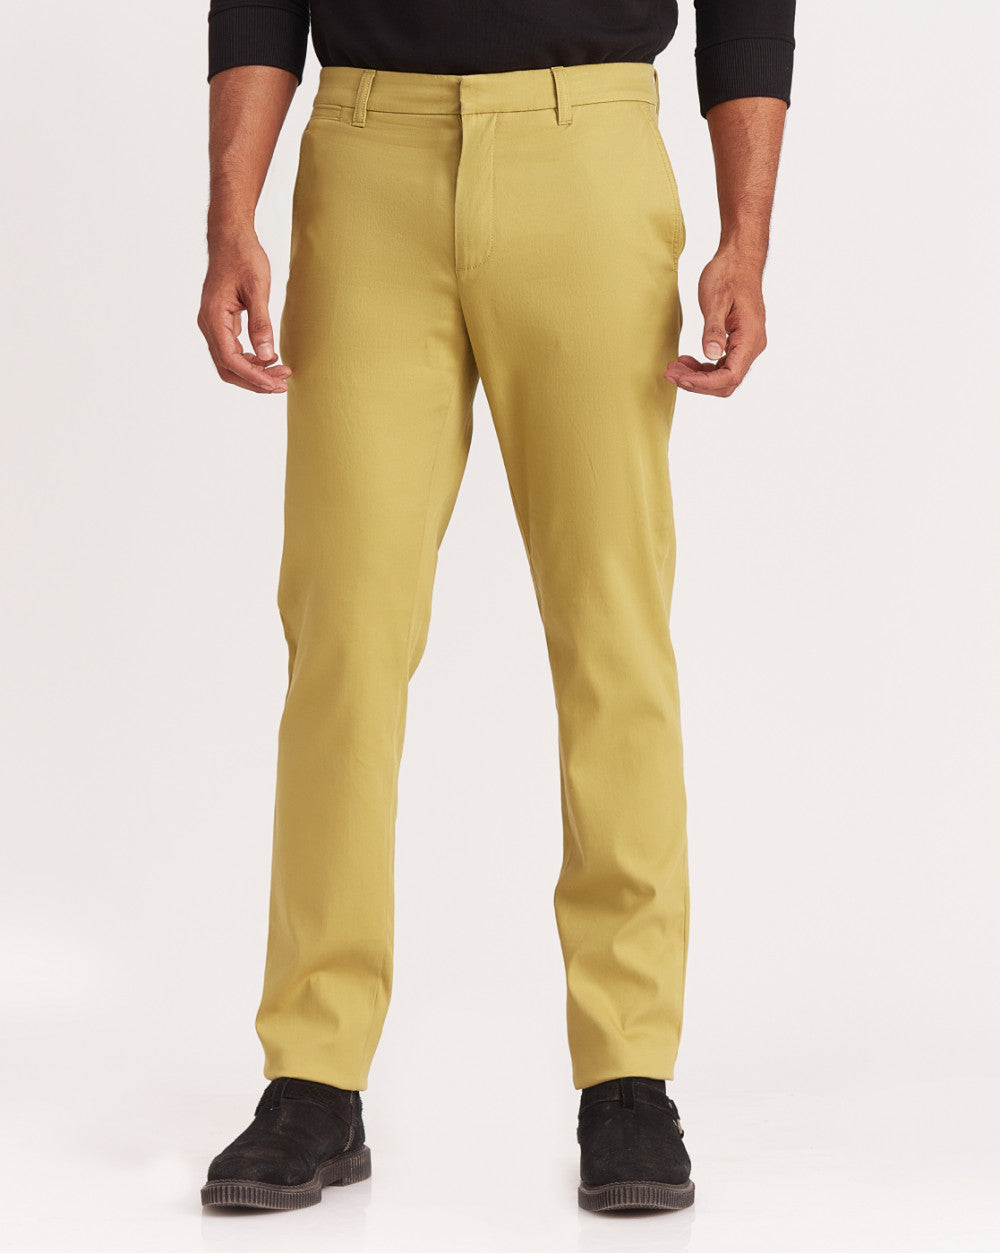 Tapered Fit Luxe Chinos - Granola Khaki